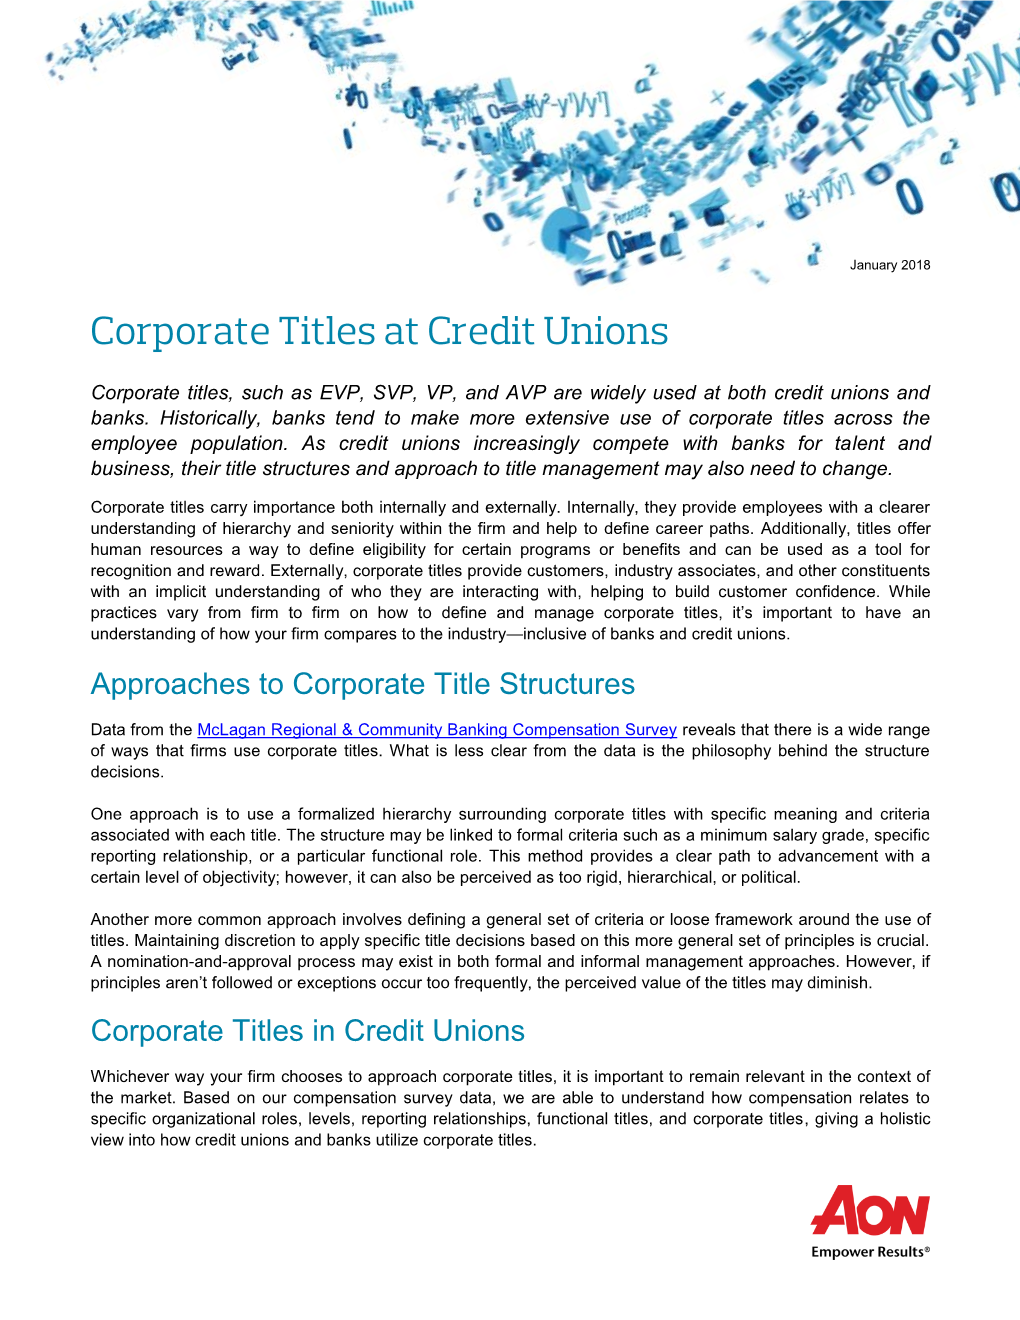 Approaches to Corporate Title Structures